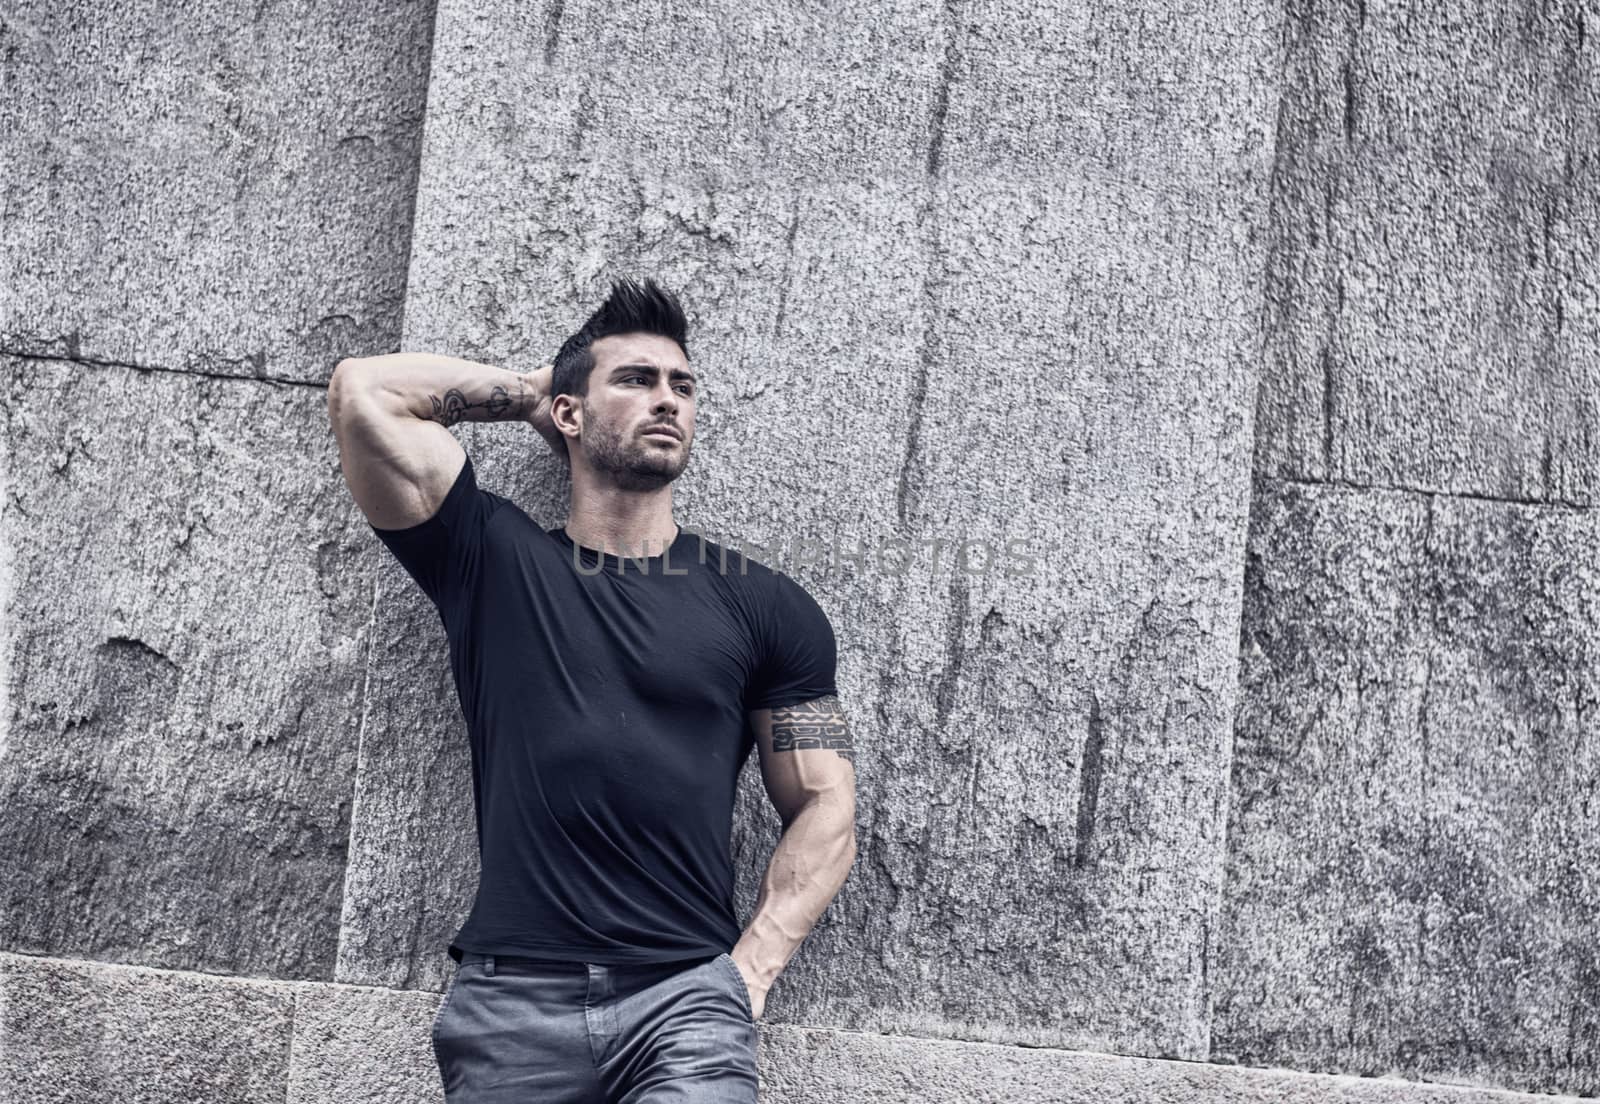 Athletic mat with tight t-shirt, against stone wall by artofphoto